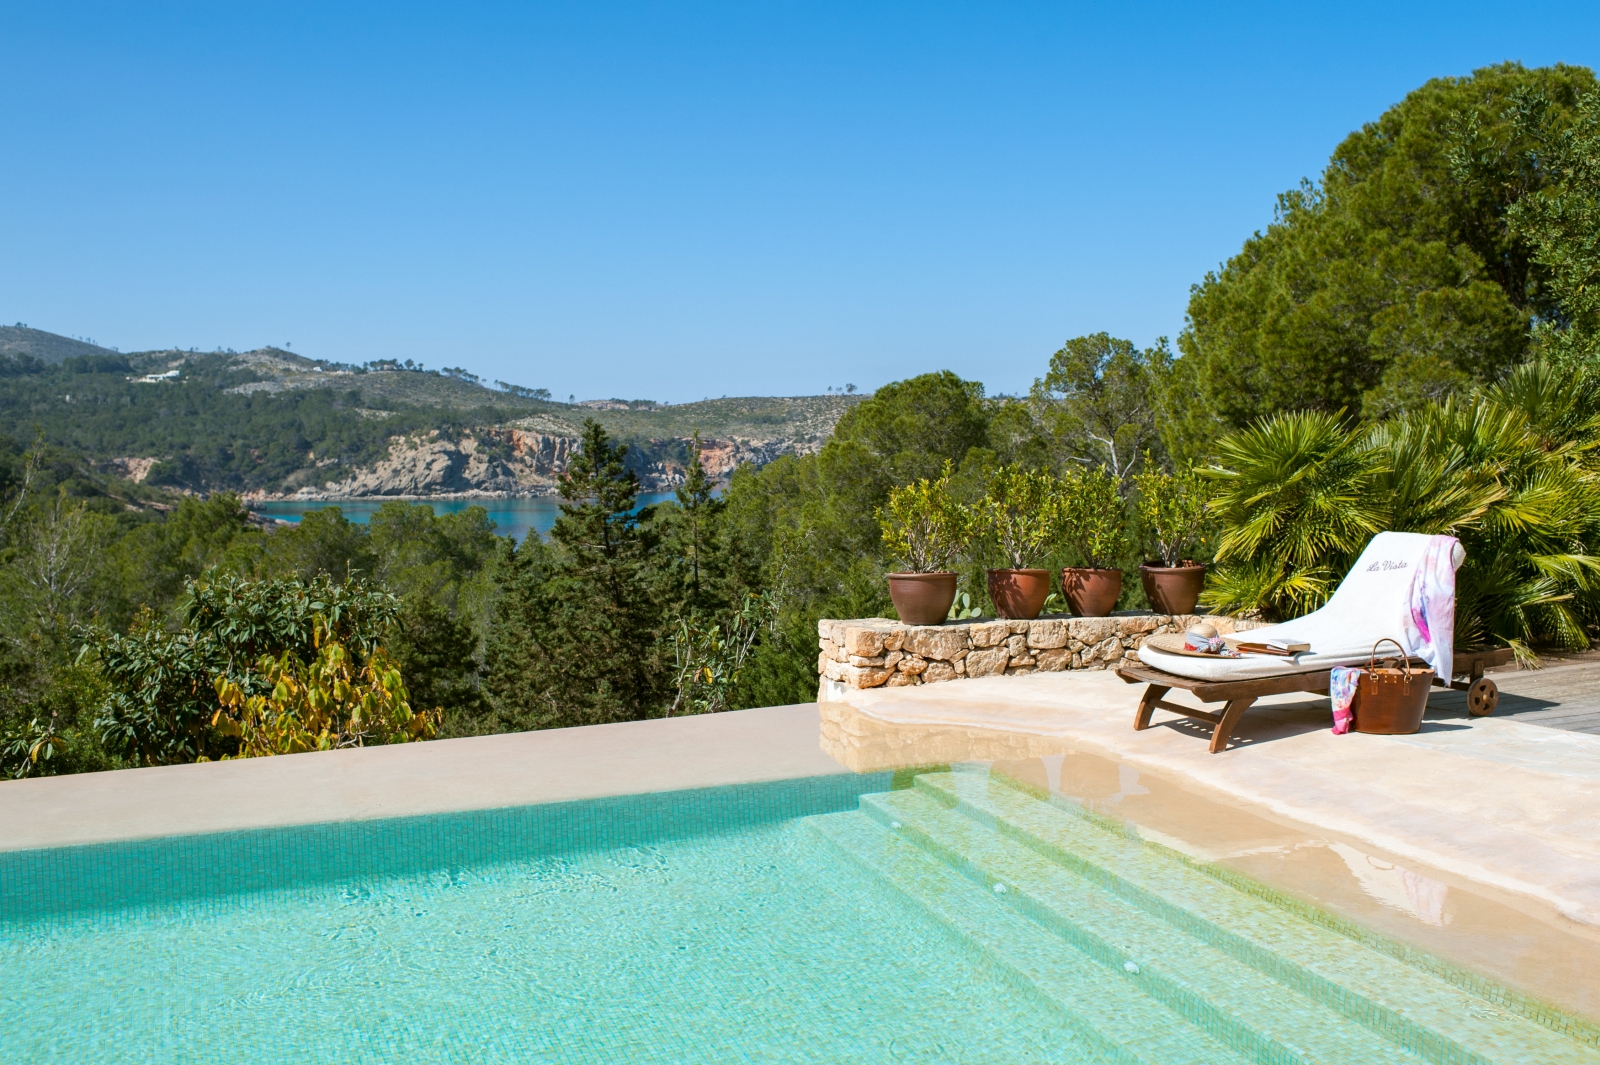 Pool area with patio, sun lounger, plants, trees and sea view at Casa Sabena on Ibiza, Spain